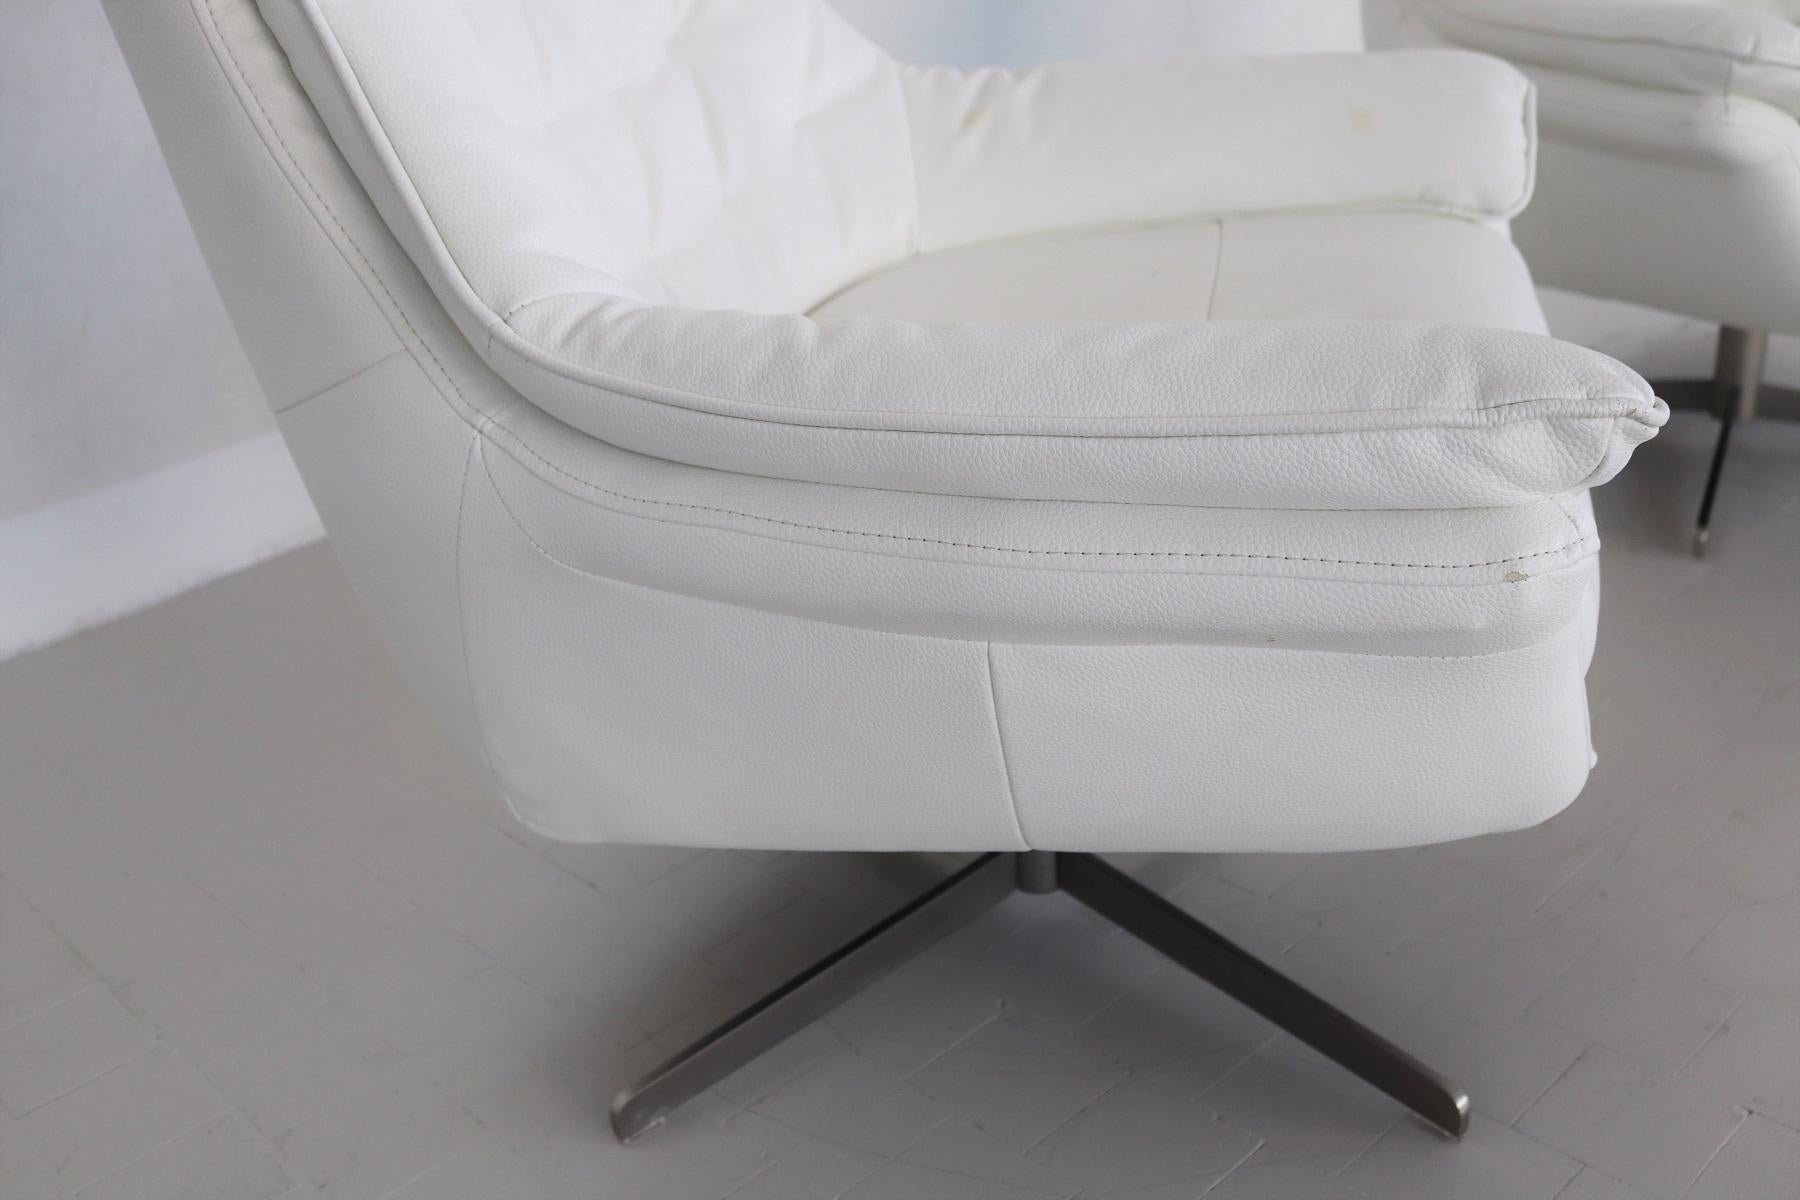 Italian Midcentury Swivel Armchairs in White Leather, 1980s For Sale 4